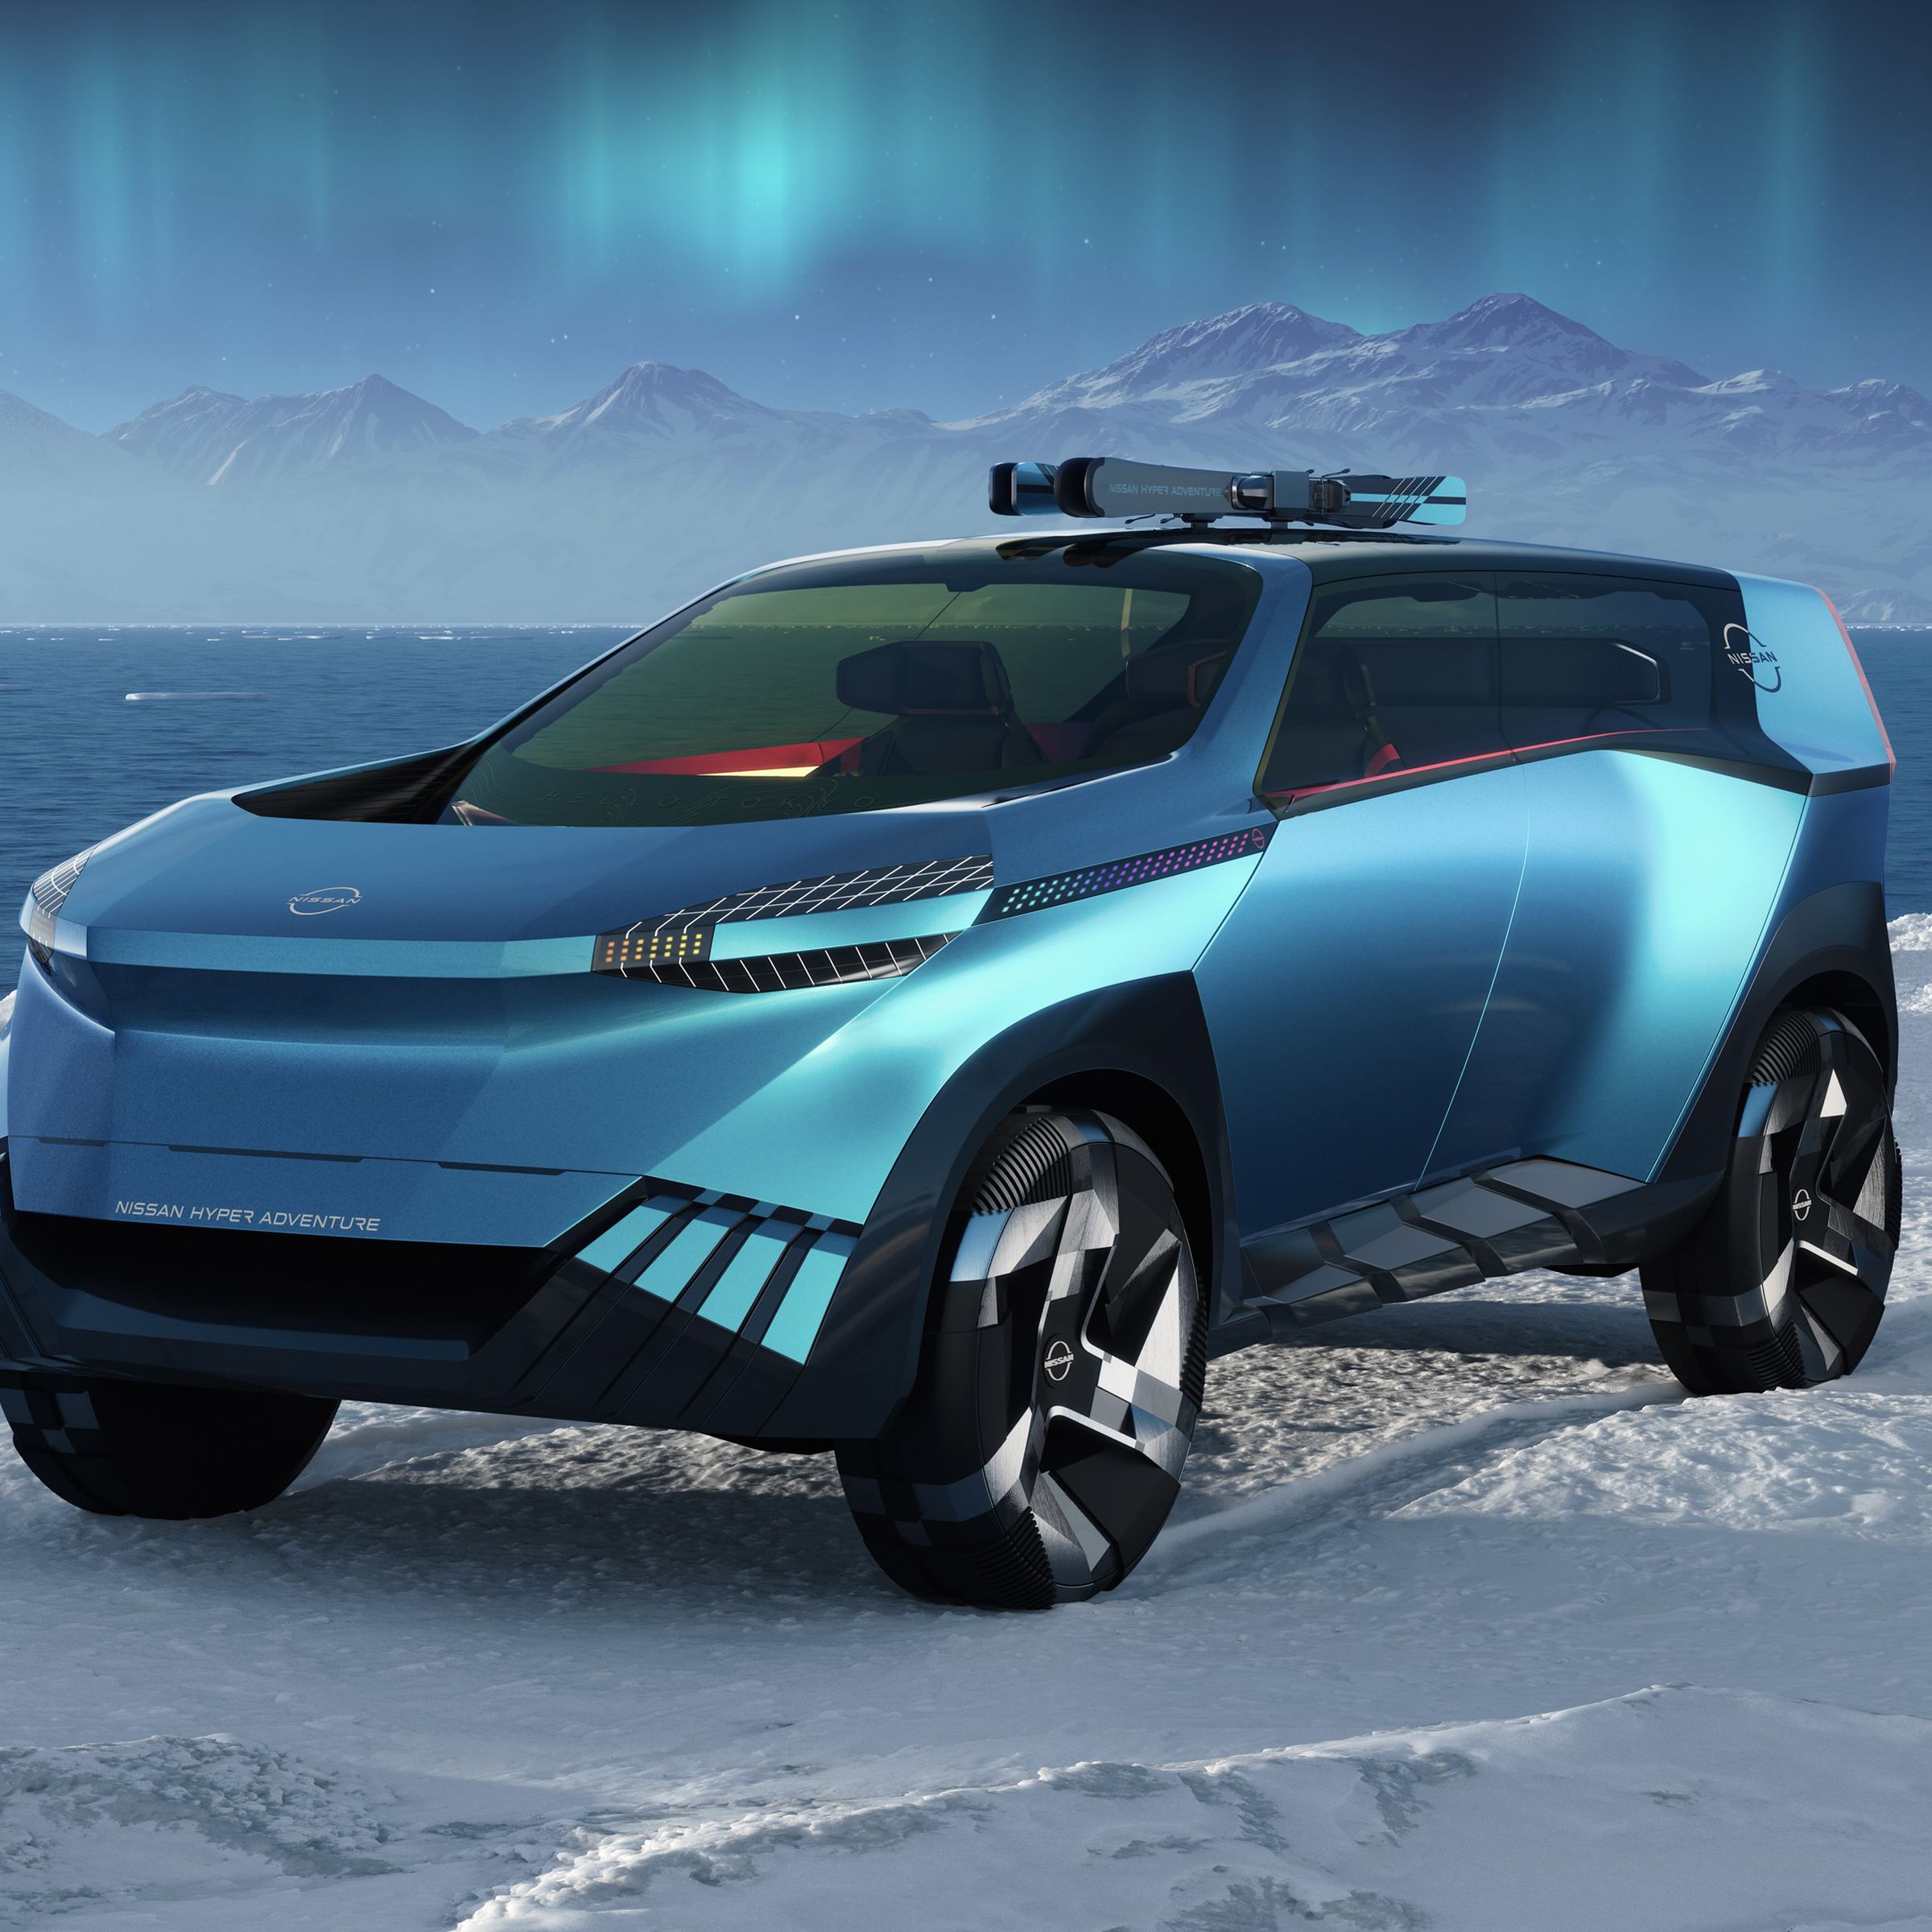 Blue polygonal SUV on snowy scape with skis on top